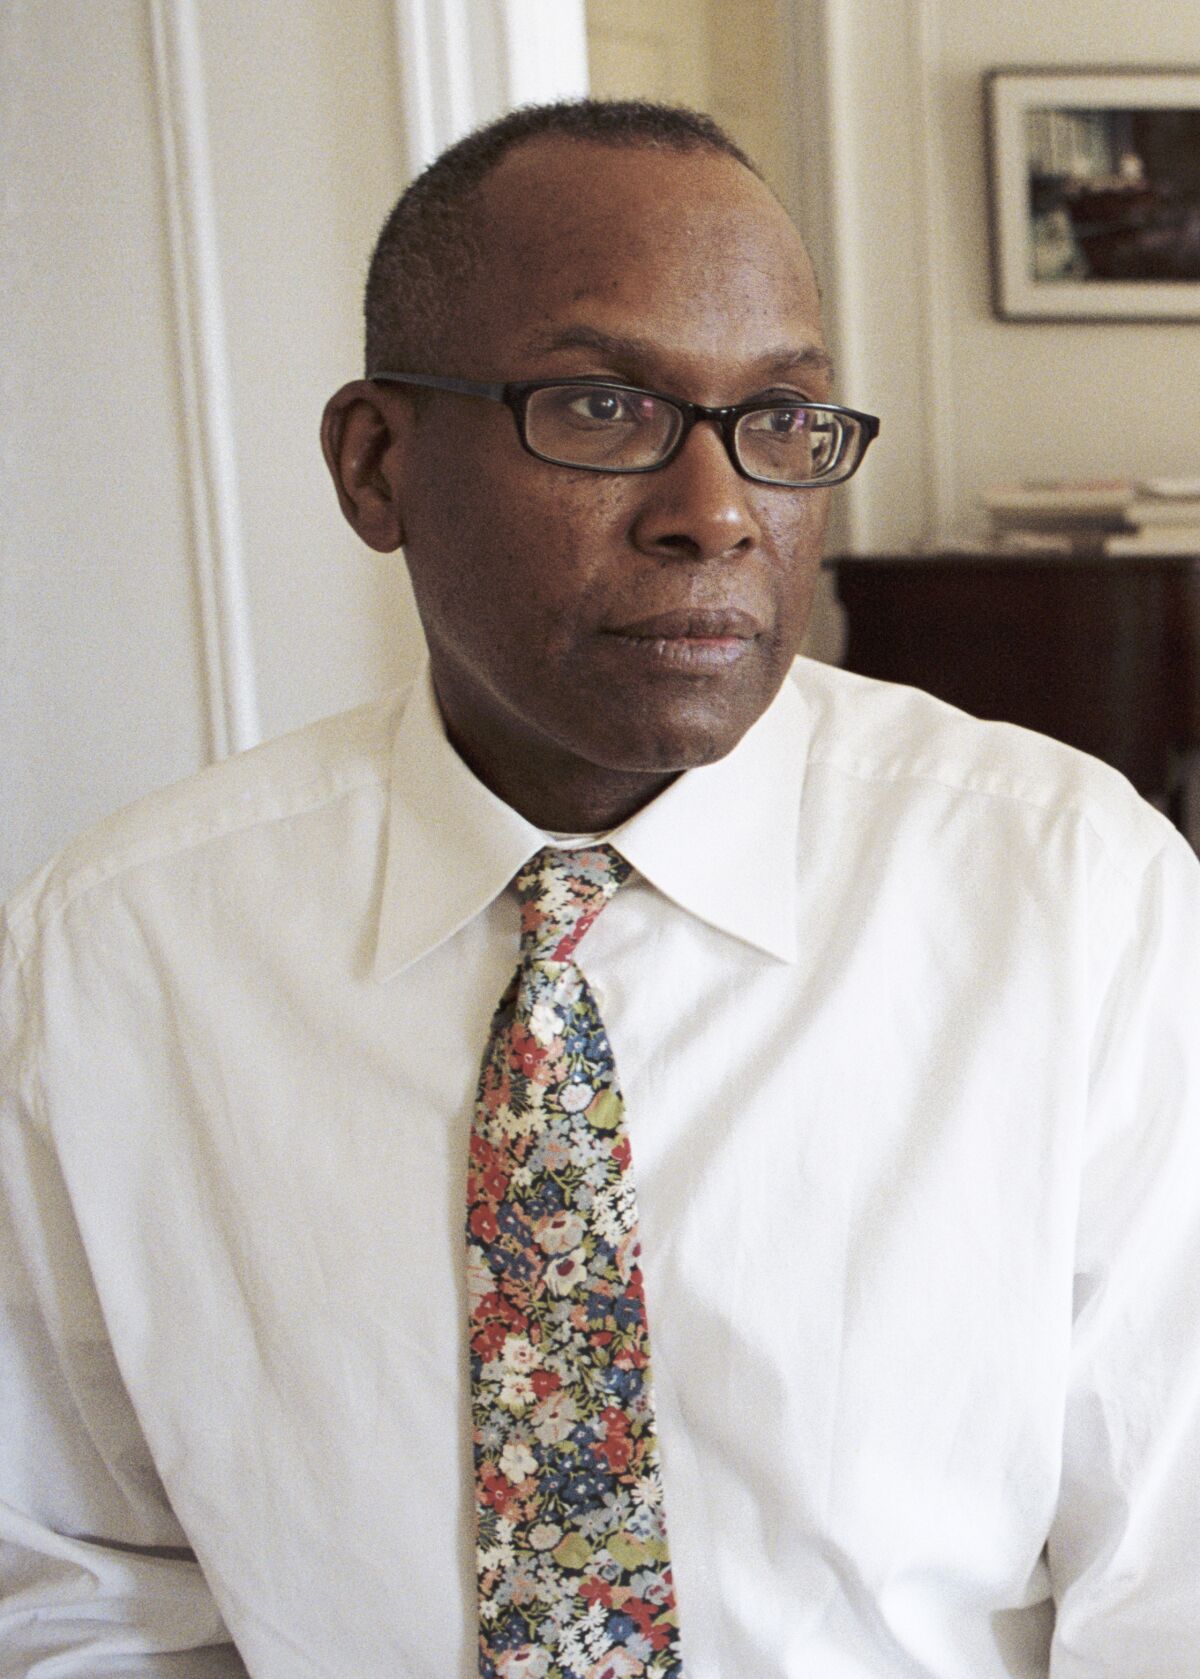 A black man wearing a white shirt and floral tie 